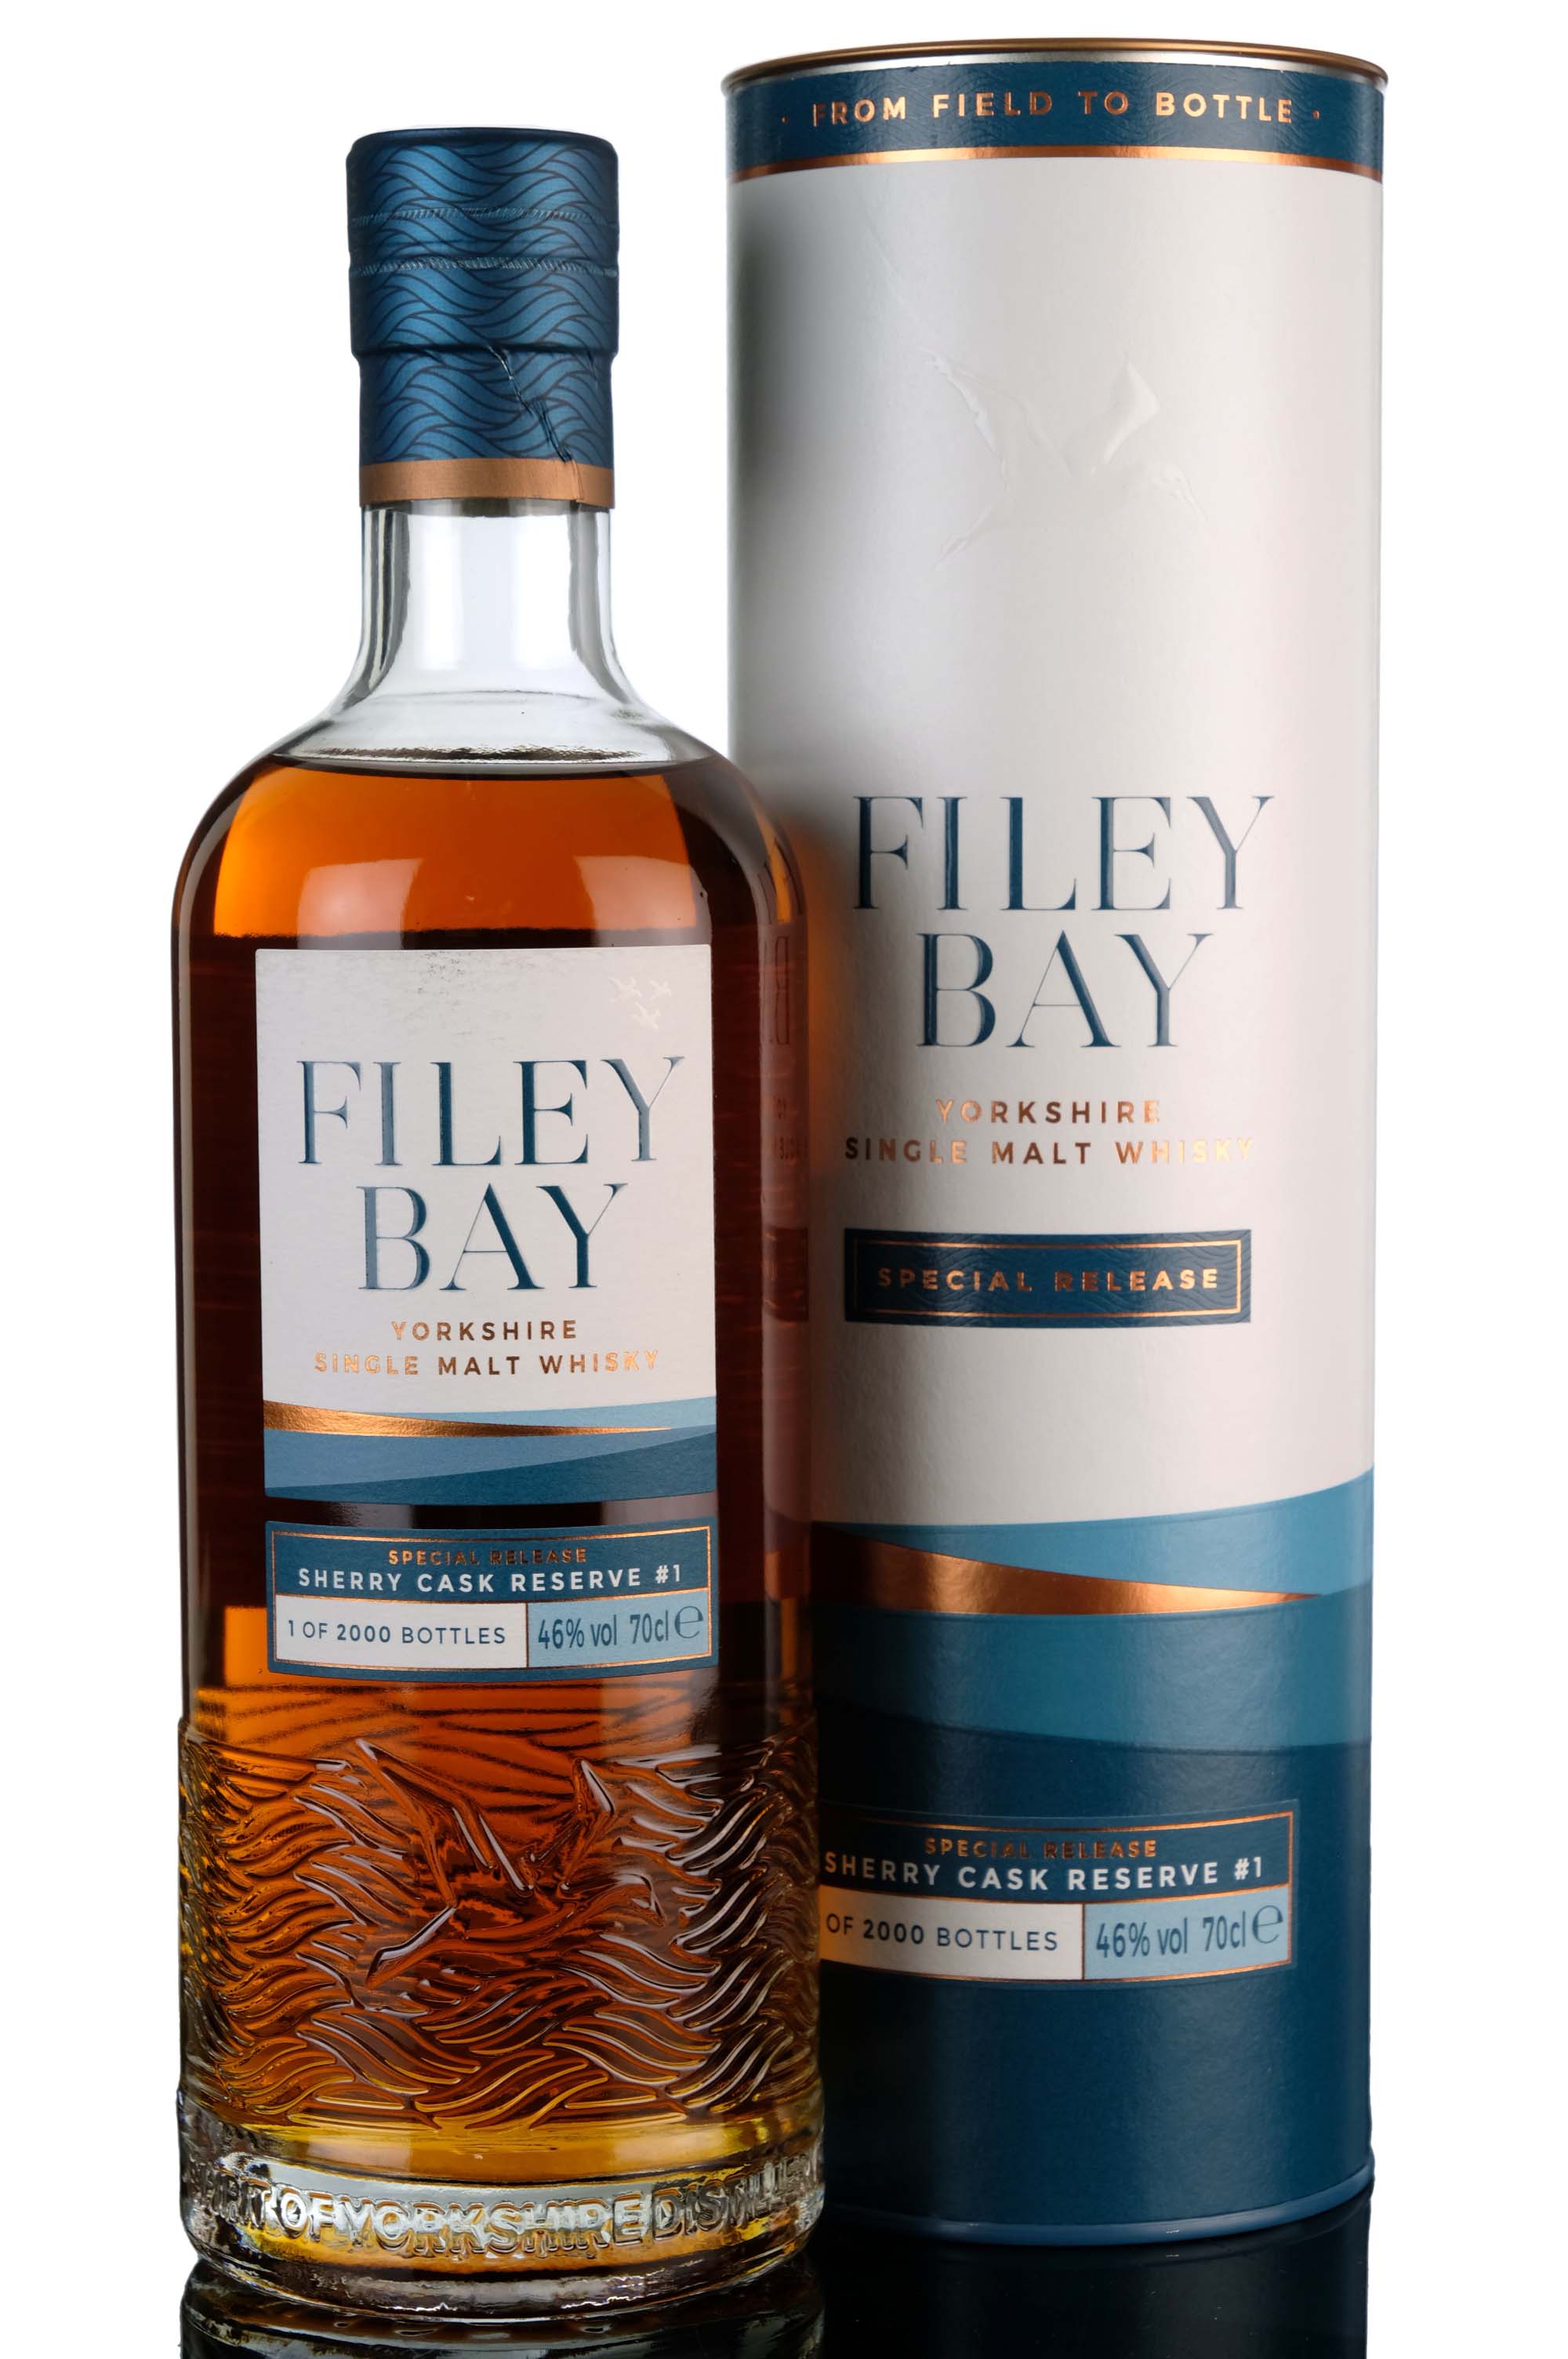 Filey Bay 2017-2020 - Special Reserve - Sherry Cask Reserve No.1